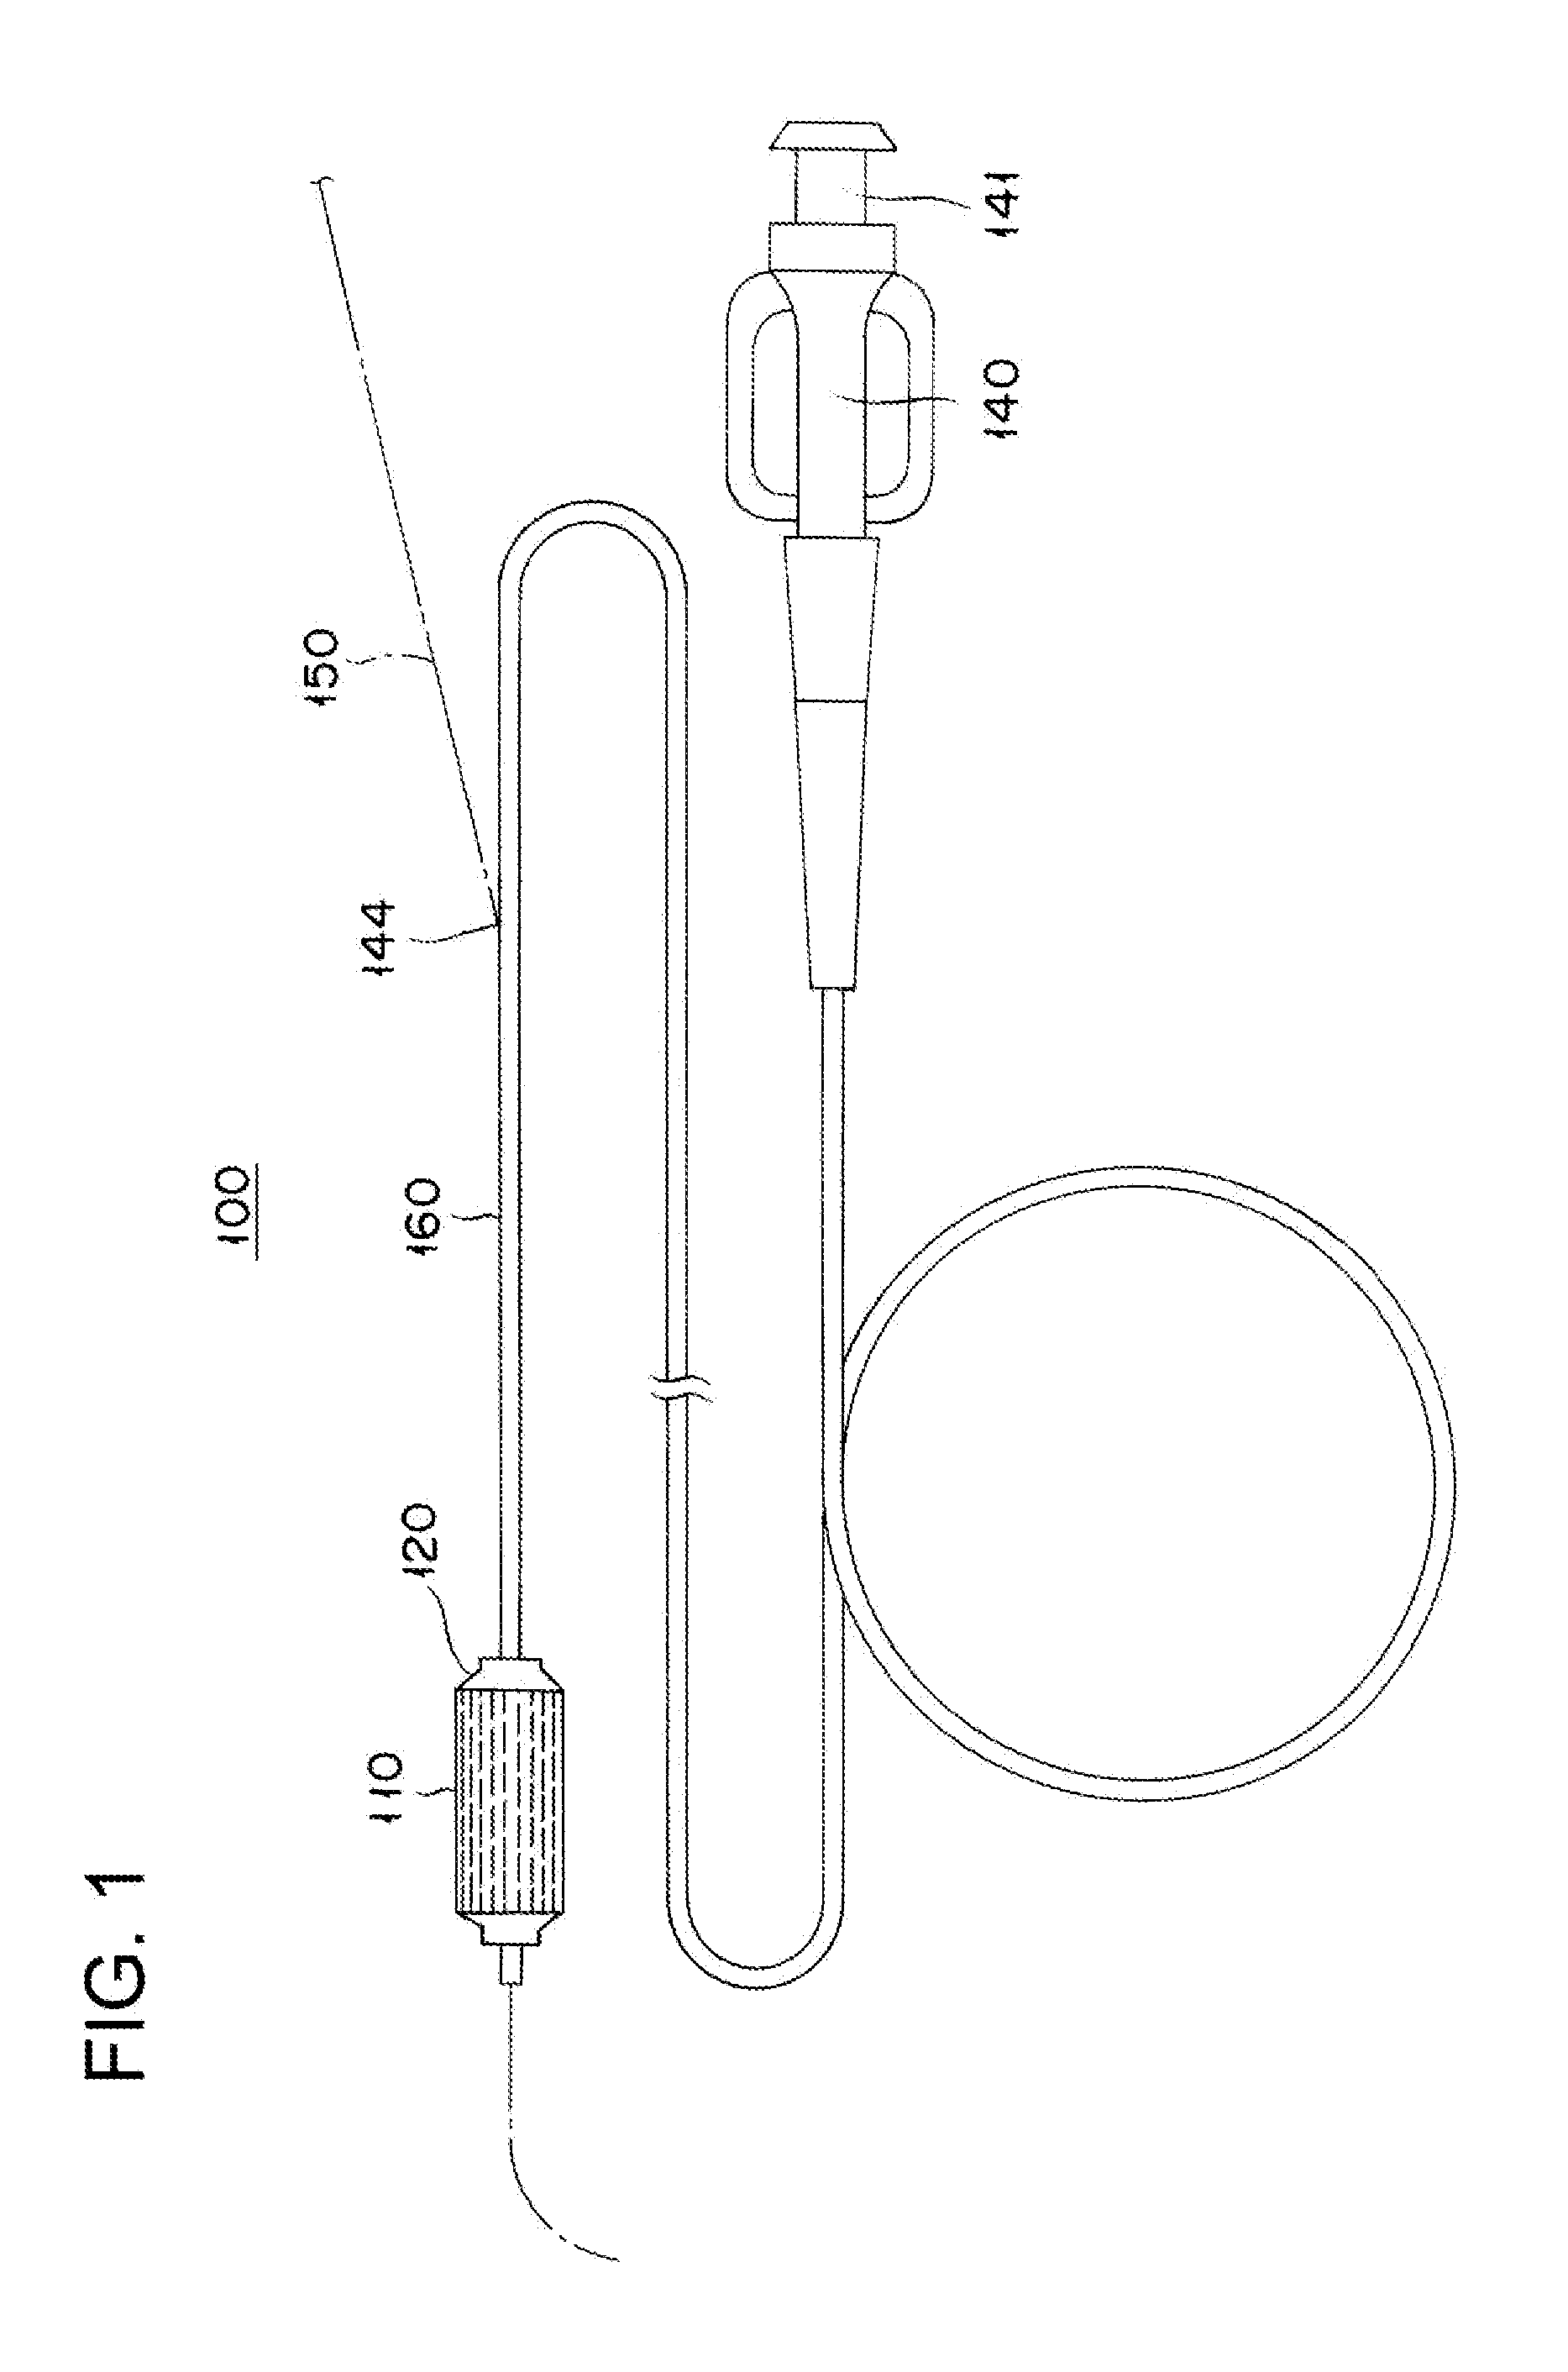 Indwelling device delivery system